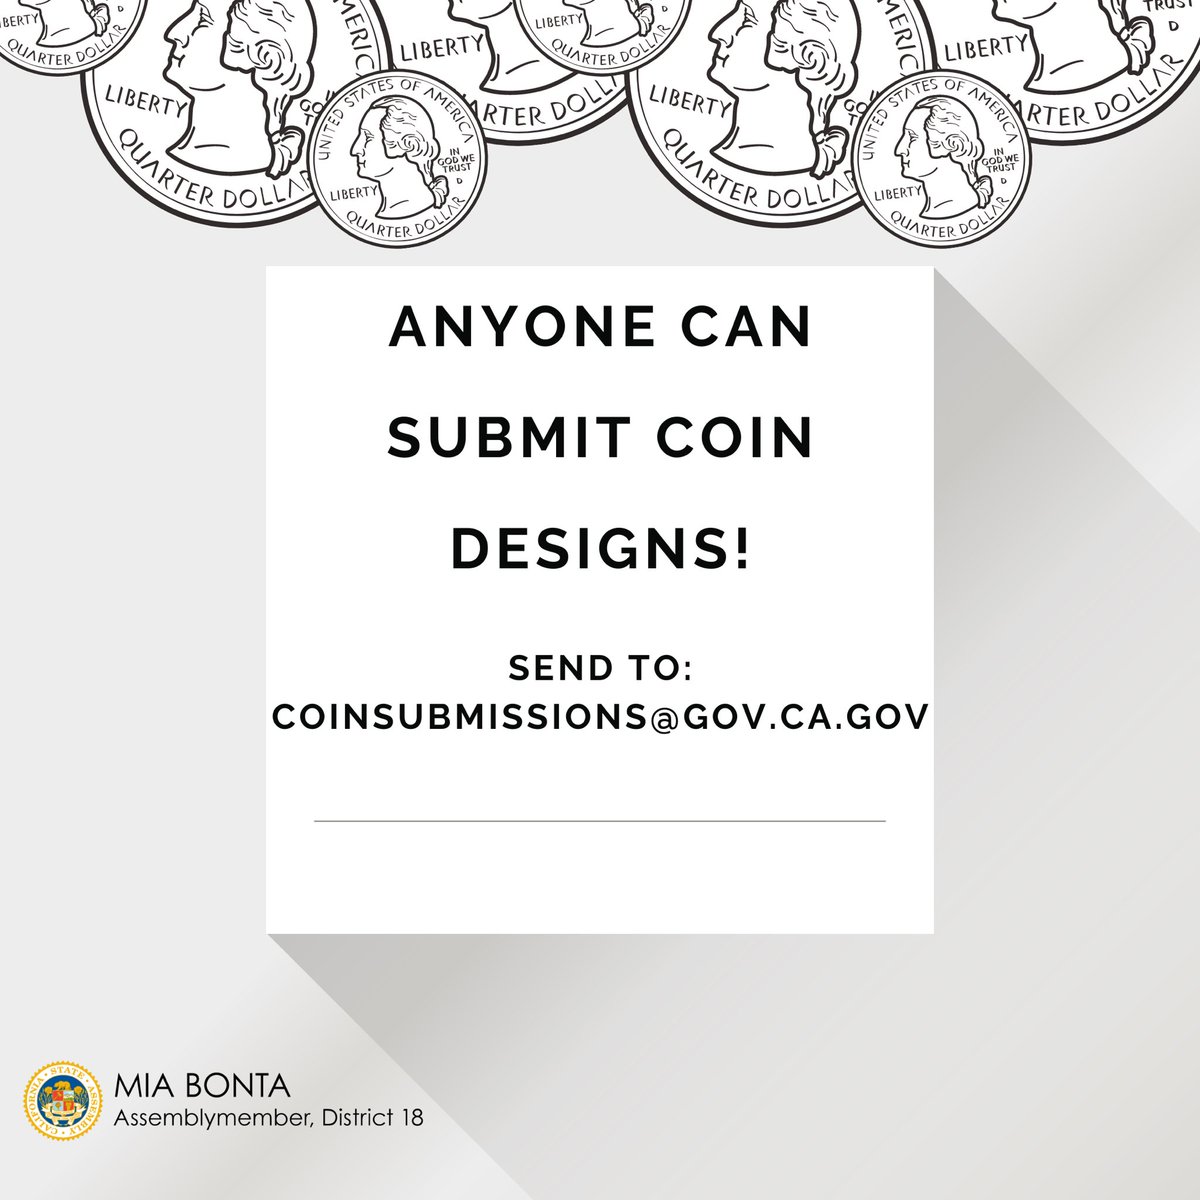 🎨Are you an artist who wants to be considered for California's $1 coin design slated to be issued in 2026? Then submit your coin design today! Anyone can submit their coin design by sending it to coinsubmissions@gov.ca.gov.